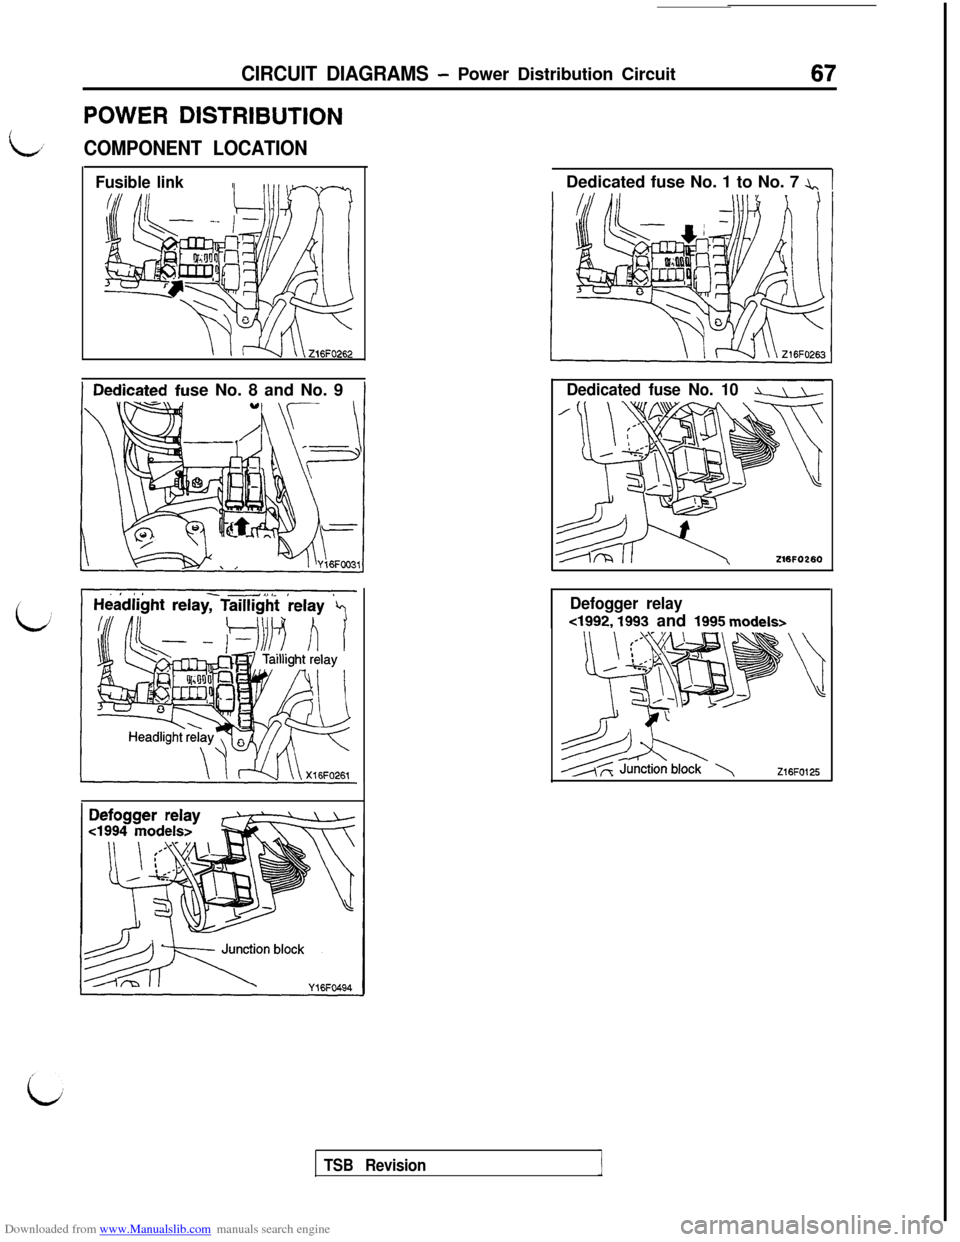 MITSUBISHI 3000GT 1994 2.G Owners Manual Downloaded from www.Manualslib.com manuals search engine CIRCUIT DIAGRAMS - Power Distribution Circuit67
POWER DISTRIBUTION
L,’COMPONENT LOCATION
Fusible linkse No. 8 and No. 9Dedicated fuse No. 1 t